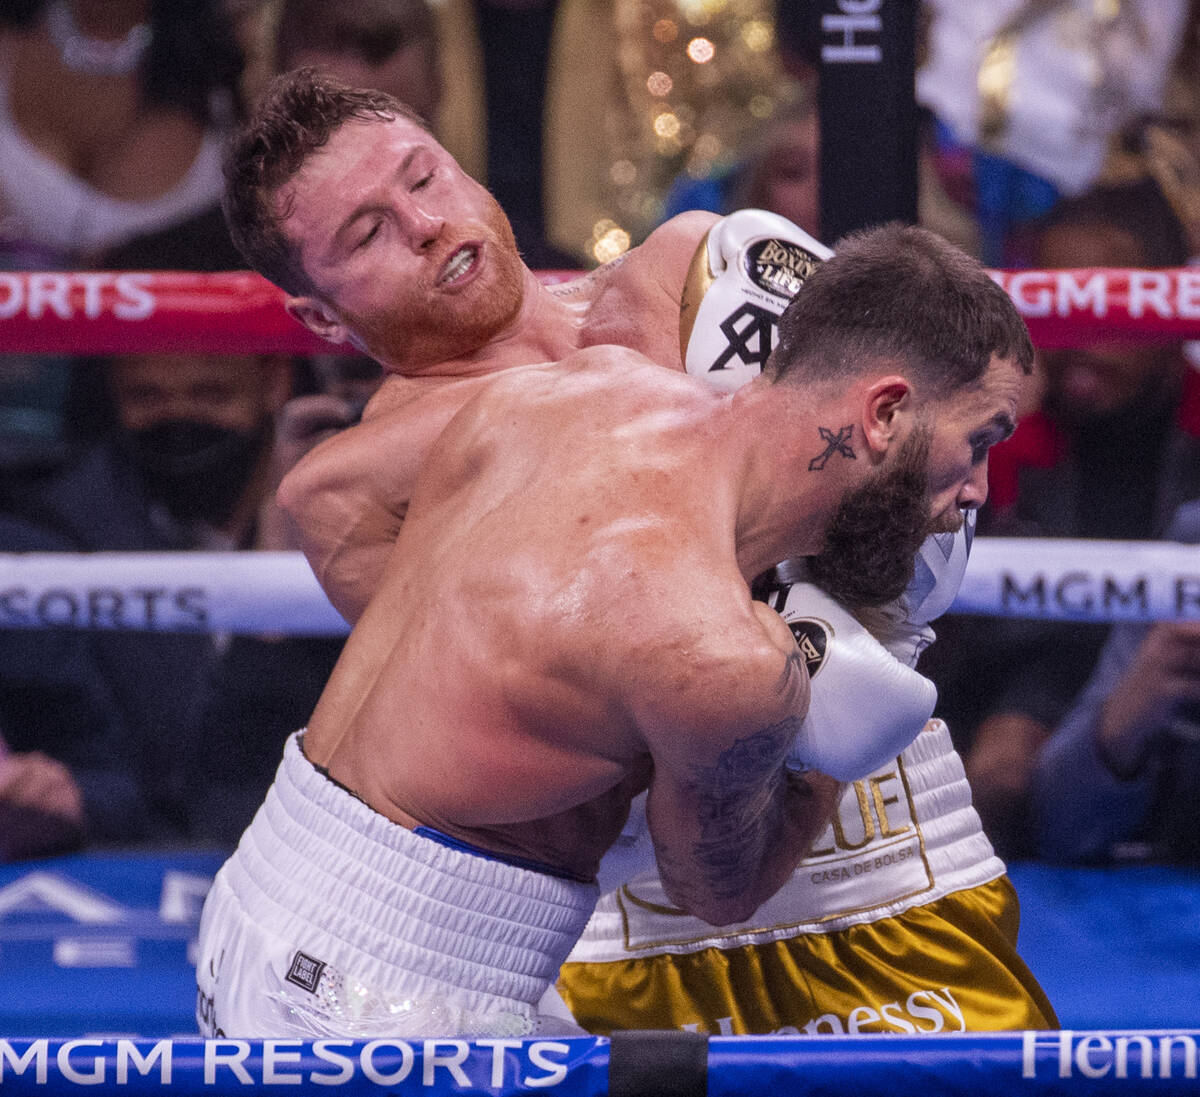 Saul "Canelo" Alvarez connects with the chin of Caleb Plant in the 1st round during t ...